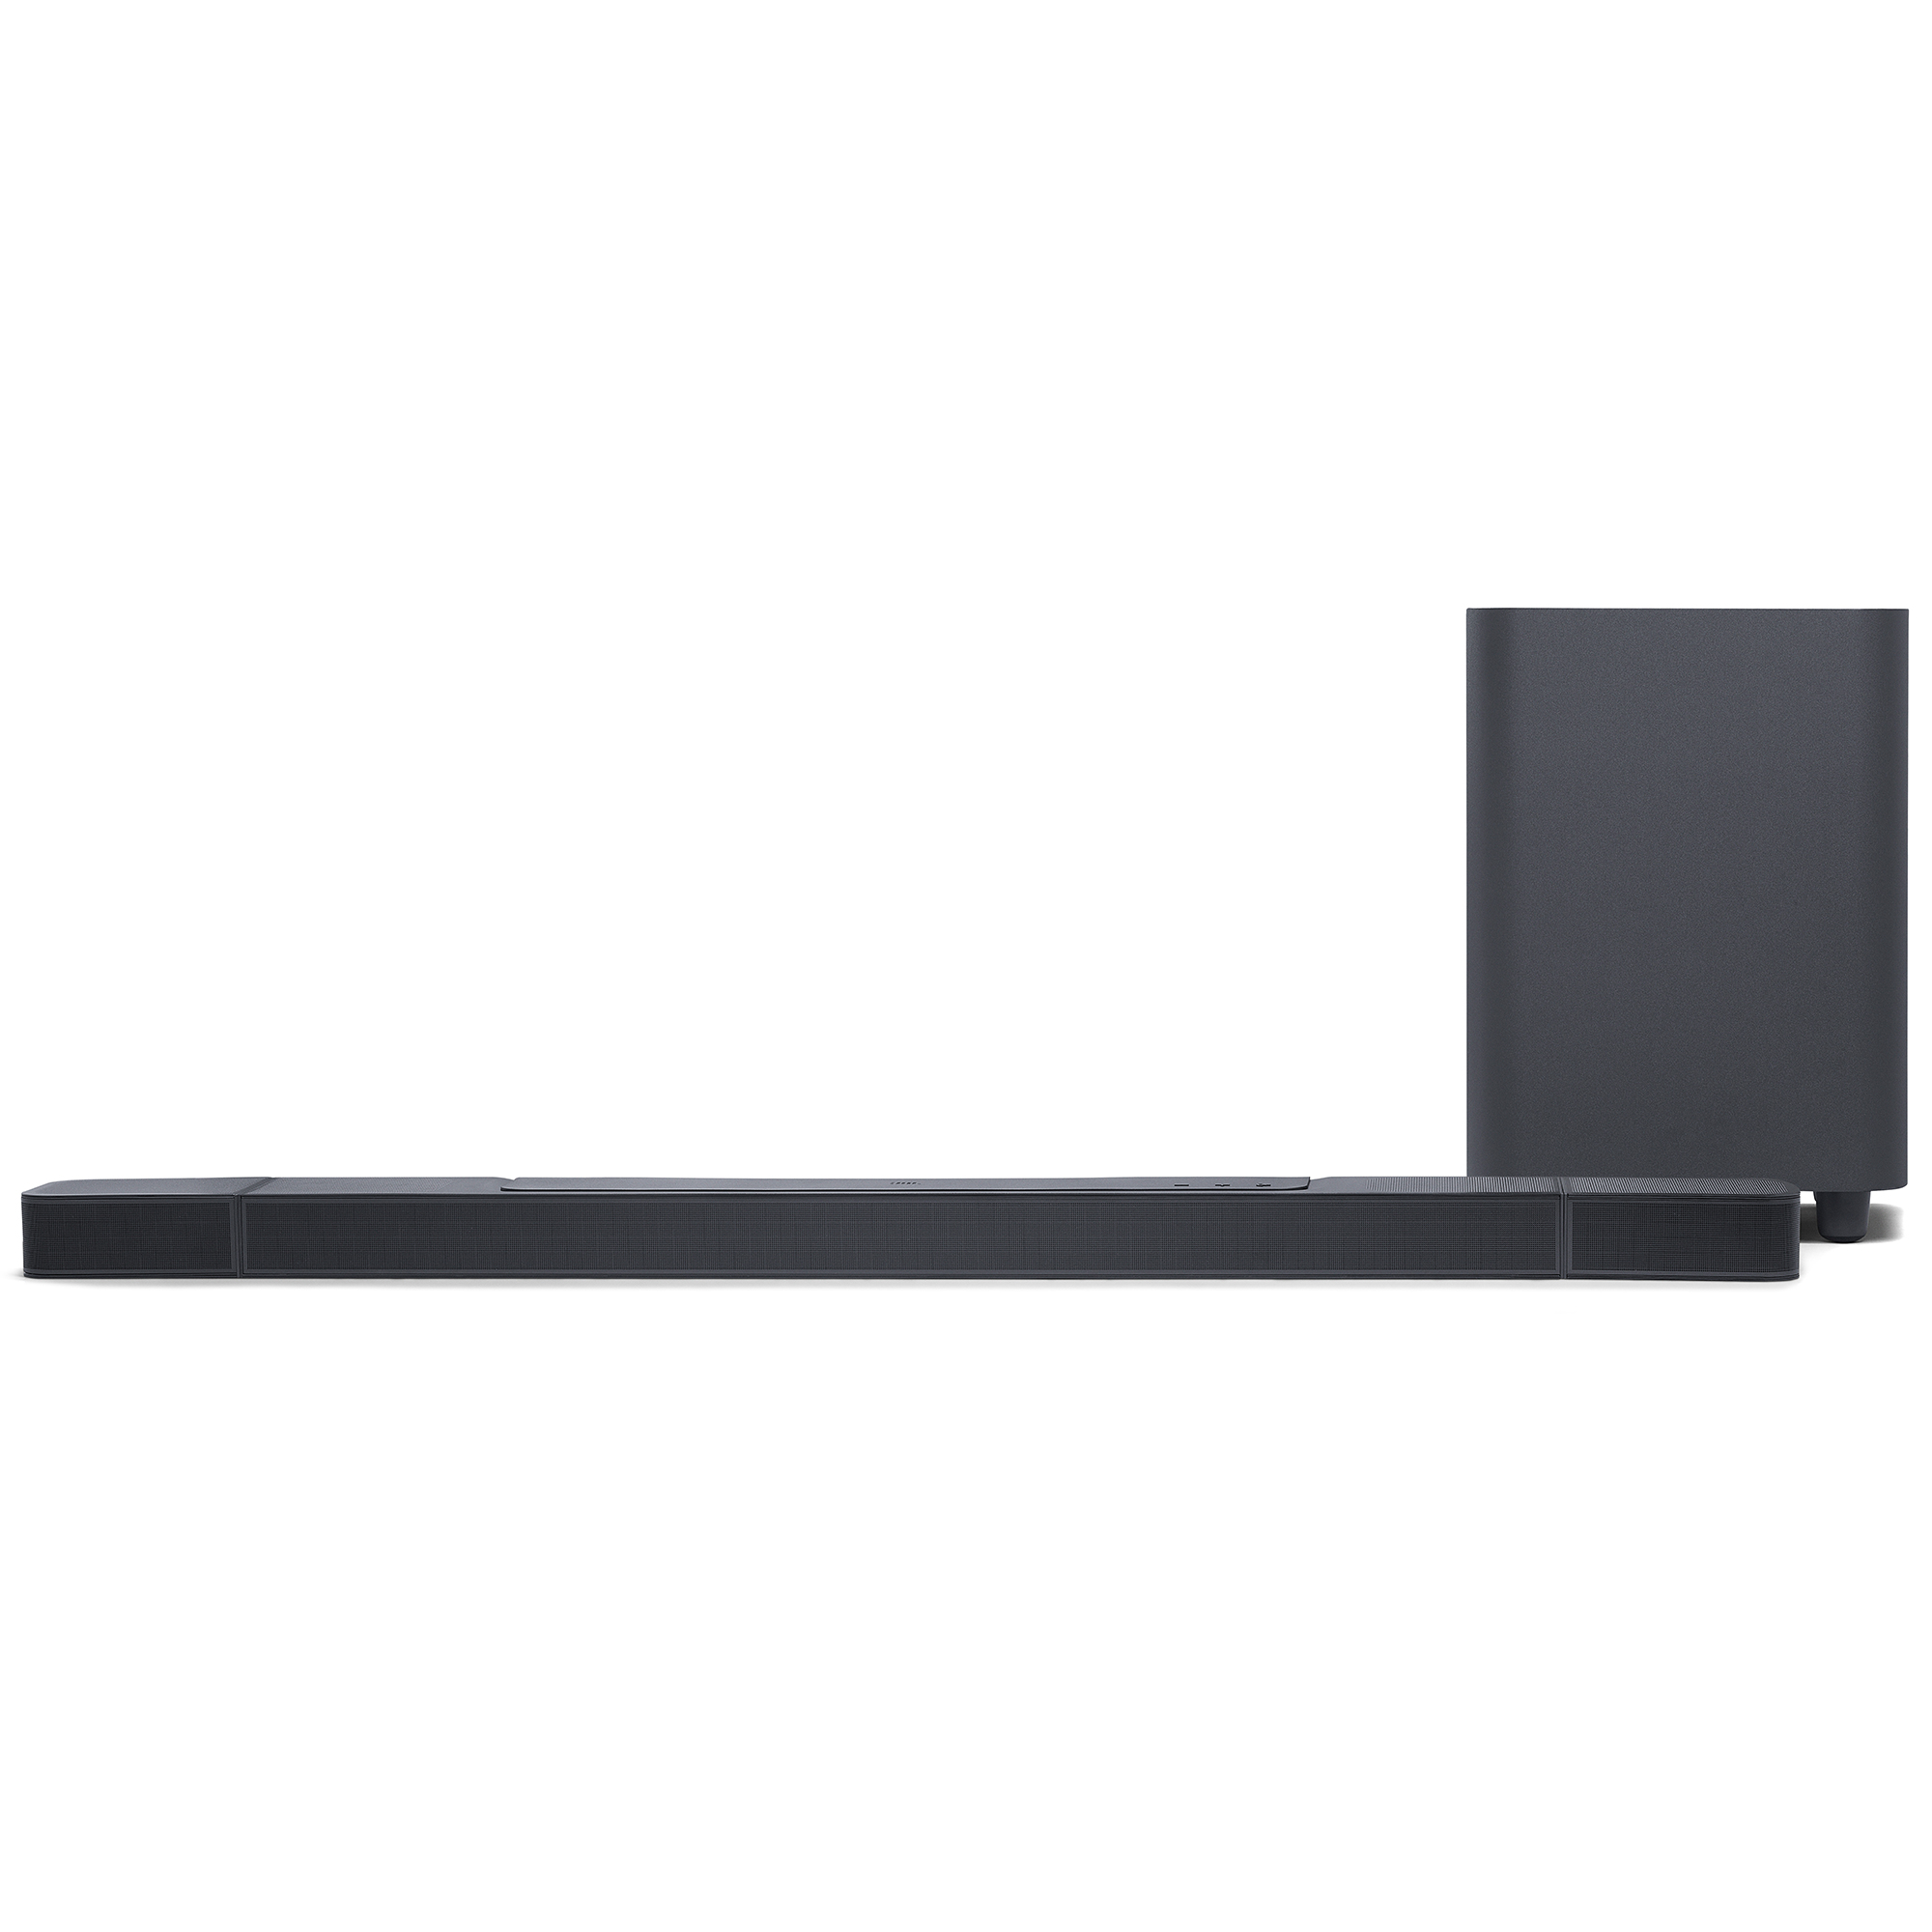 JBL BAR 1000 Pro 7.1.4-channel soundbar with detachable surround speakers, MultiBeam™, Dolby Atmos®, and DTS:X®